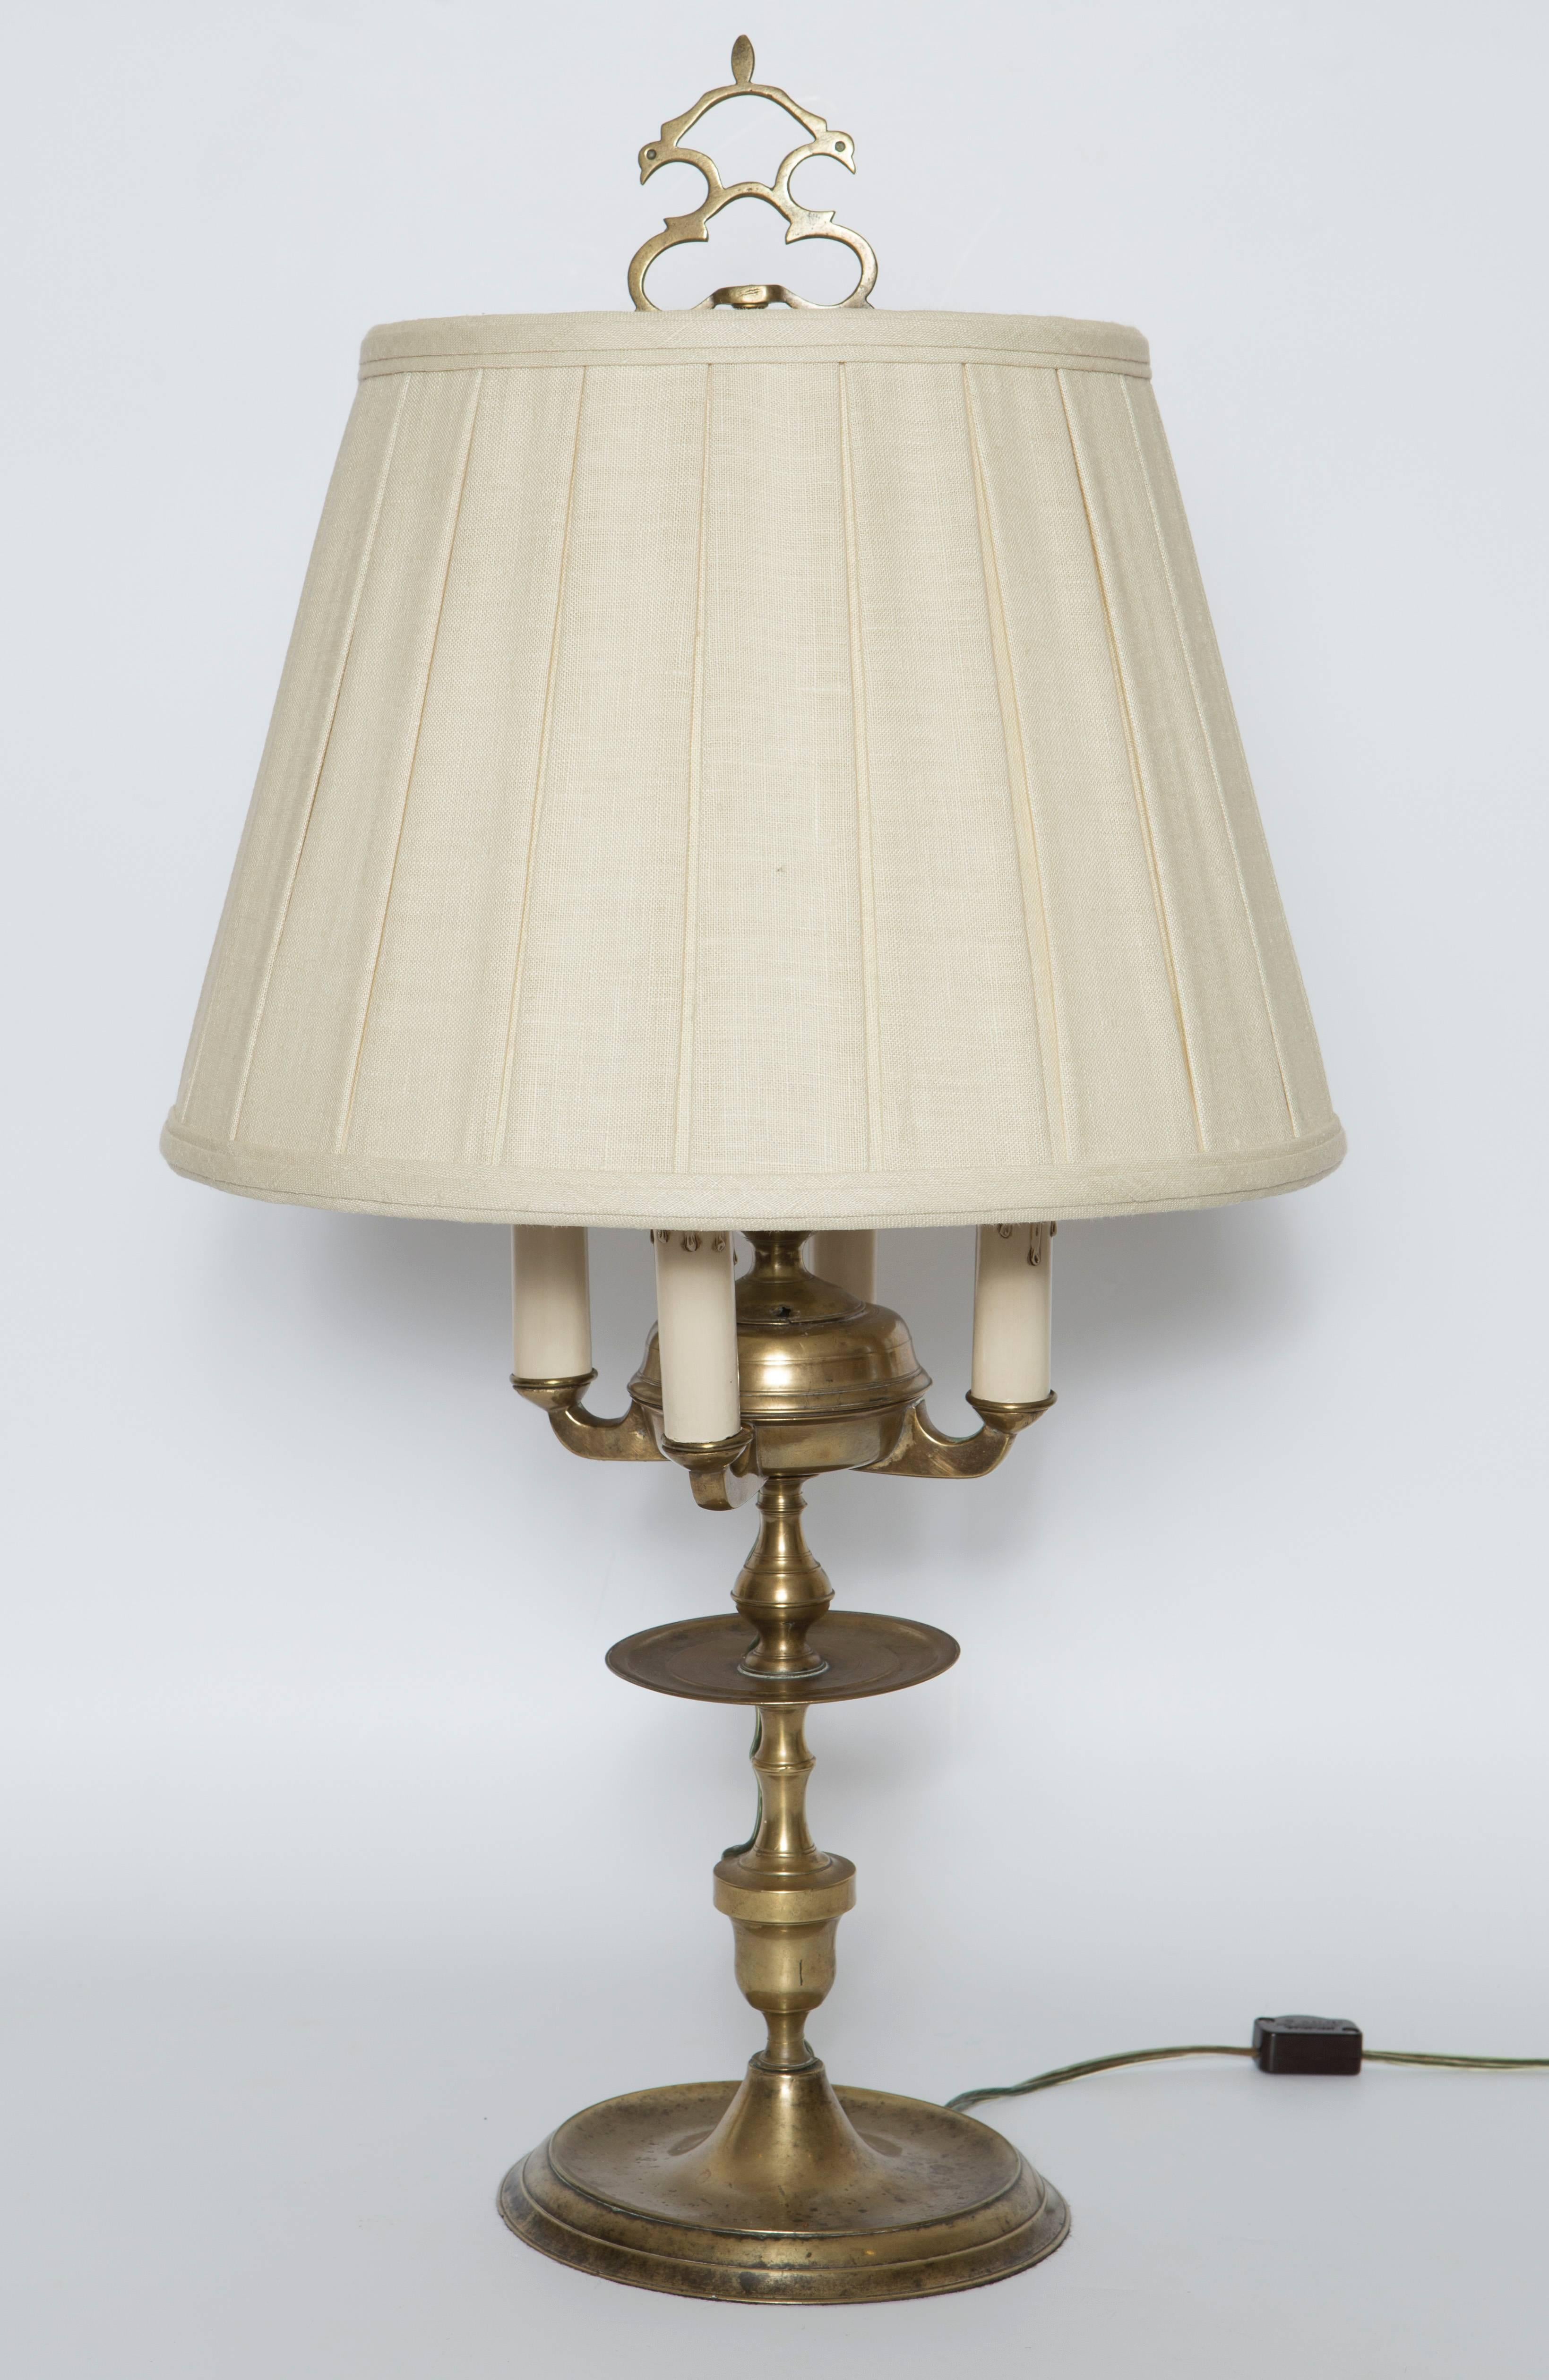 European 19th Century Brass Candelabra Lamp with Shade  For Sale